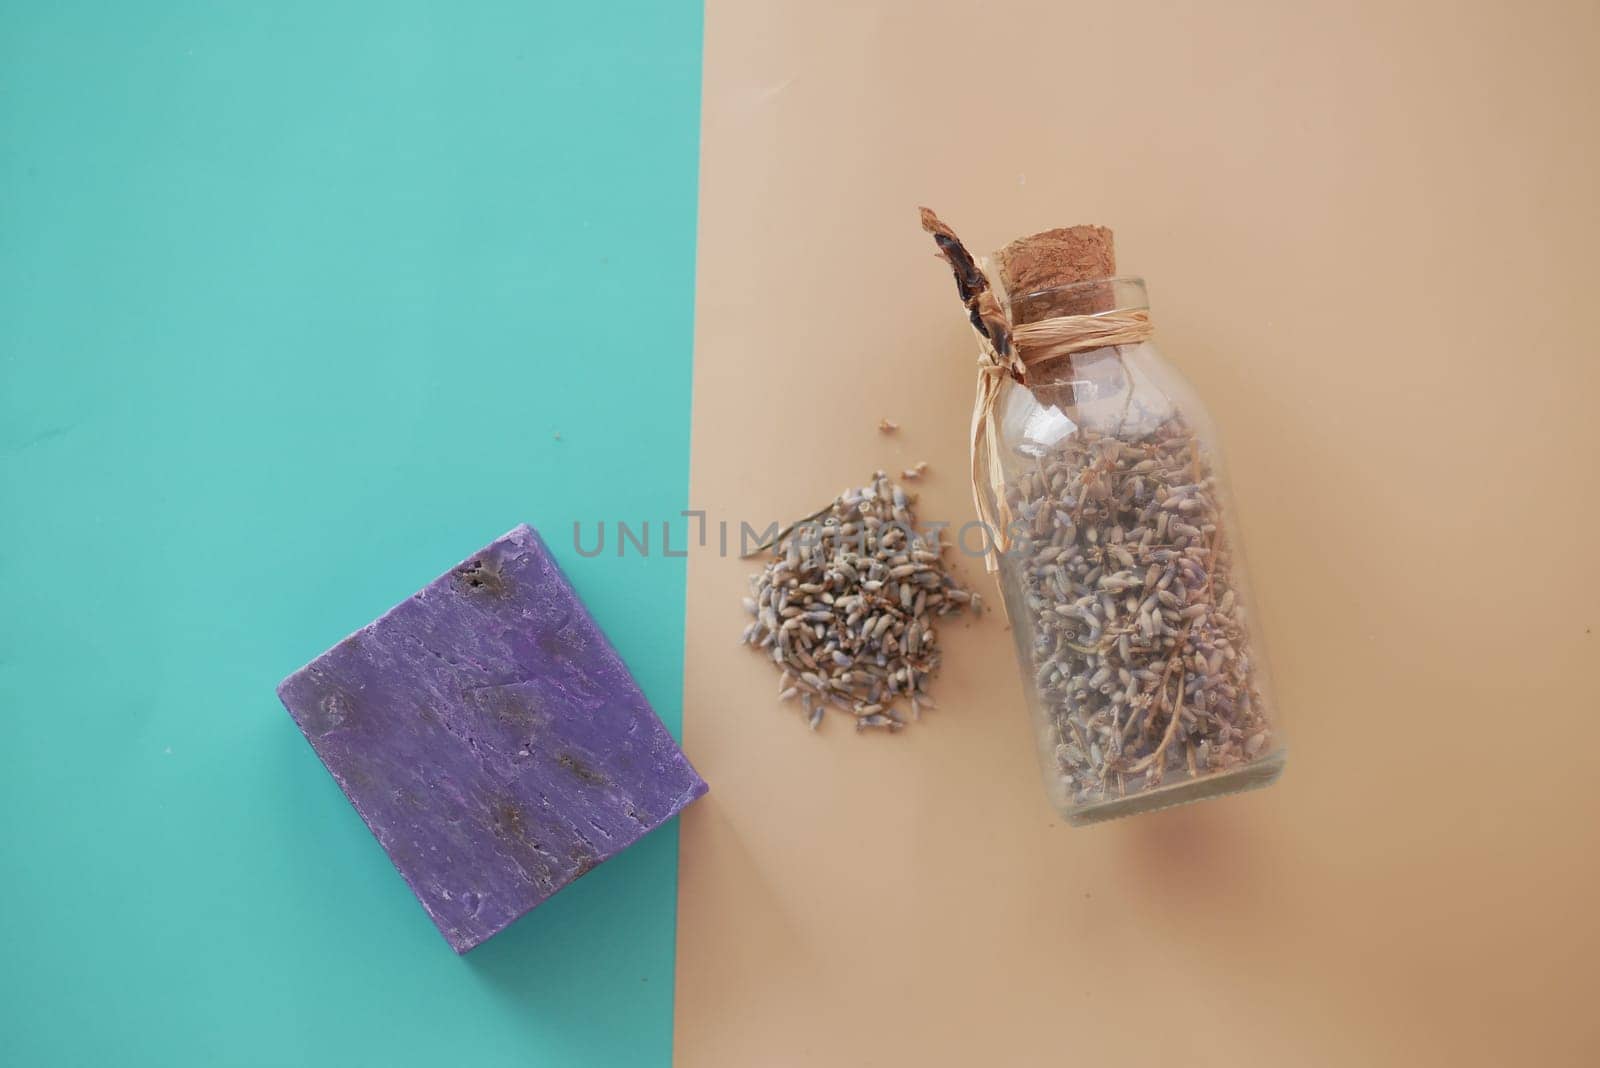 Homemade natural soap bar and lavender flower on table by towfiq007